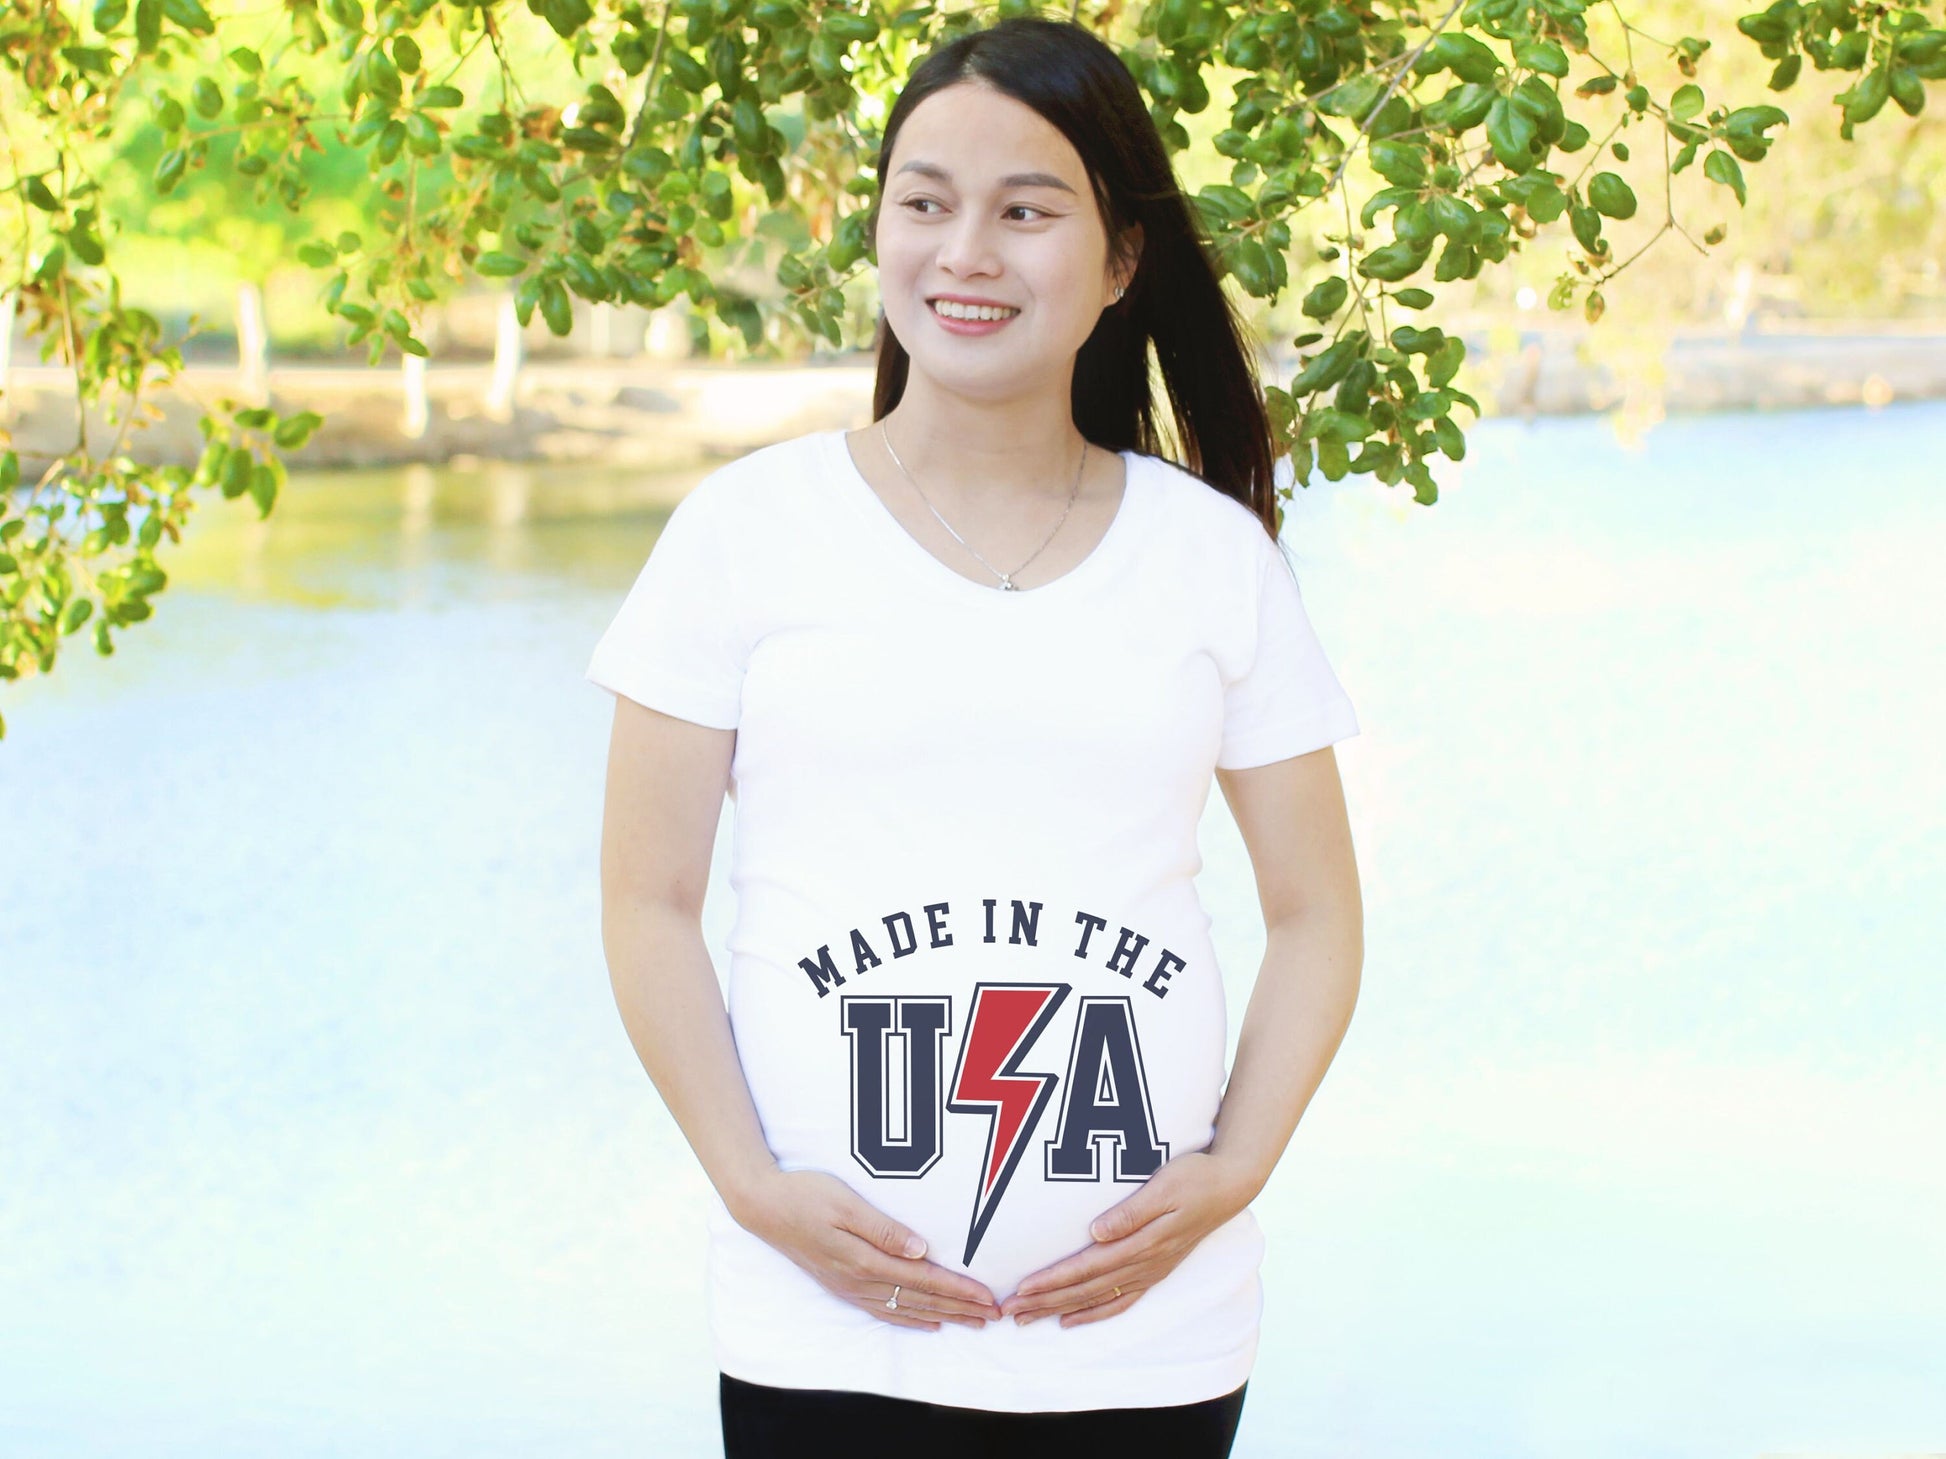 Made in the USA Maternity fit T-Shirt - maternity cut shirt with ruched sides - 4th of july pregnancy shirt